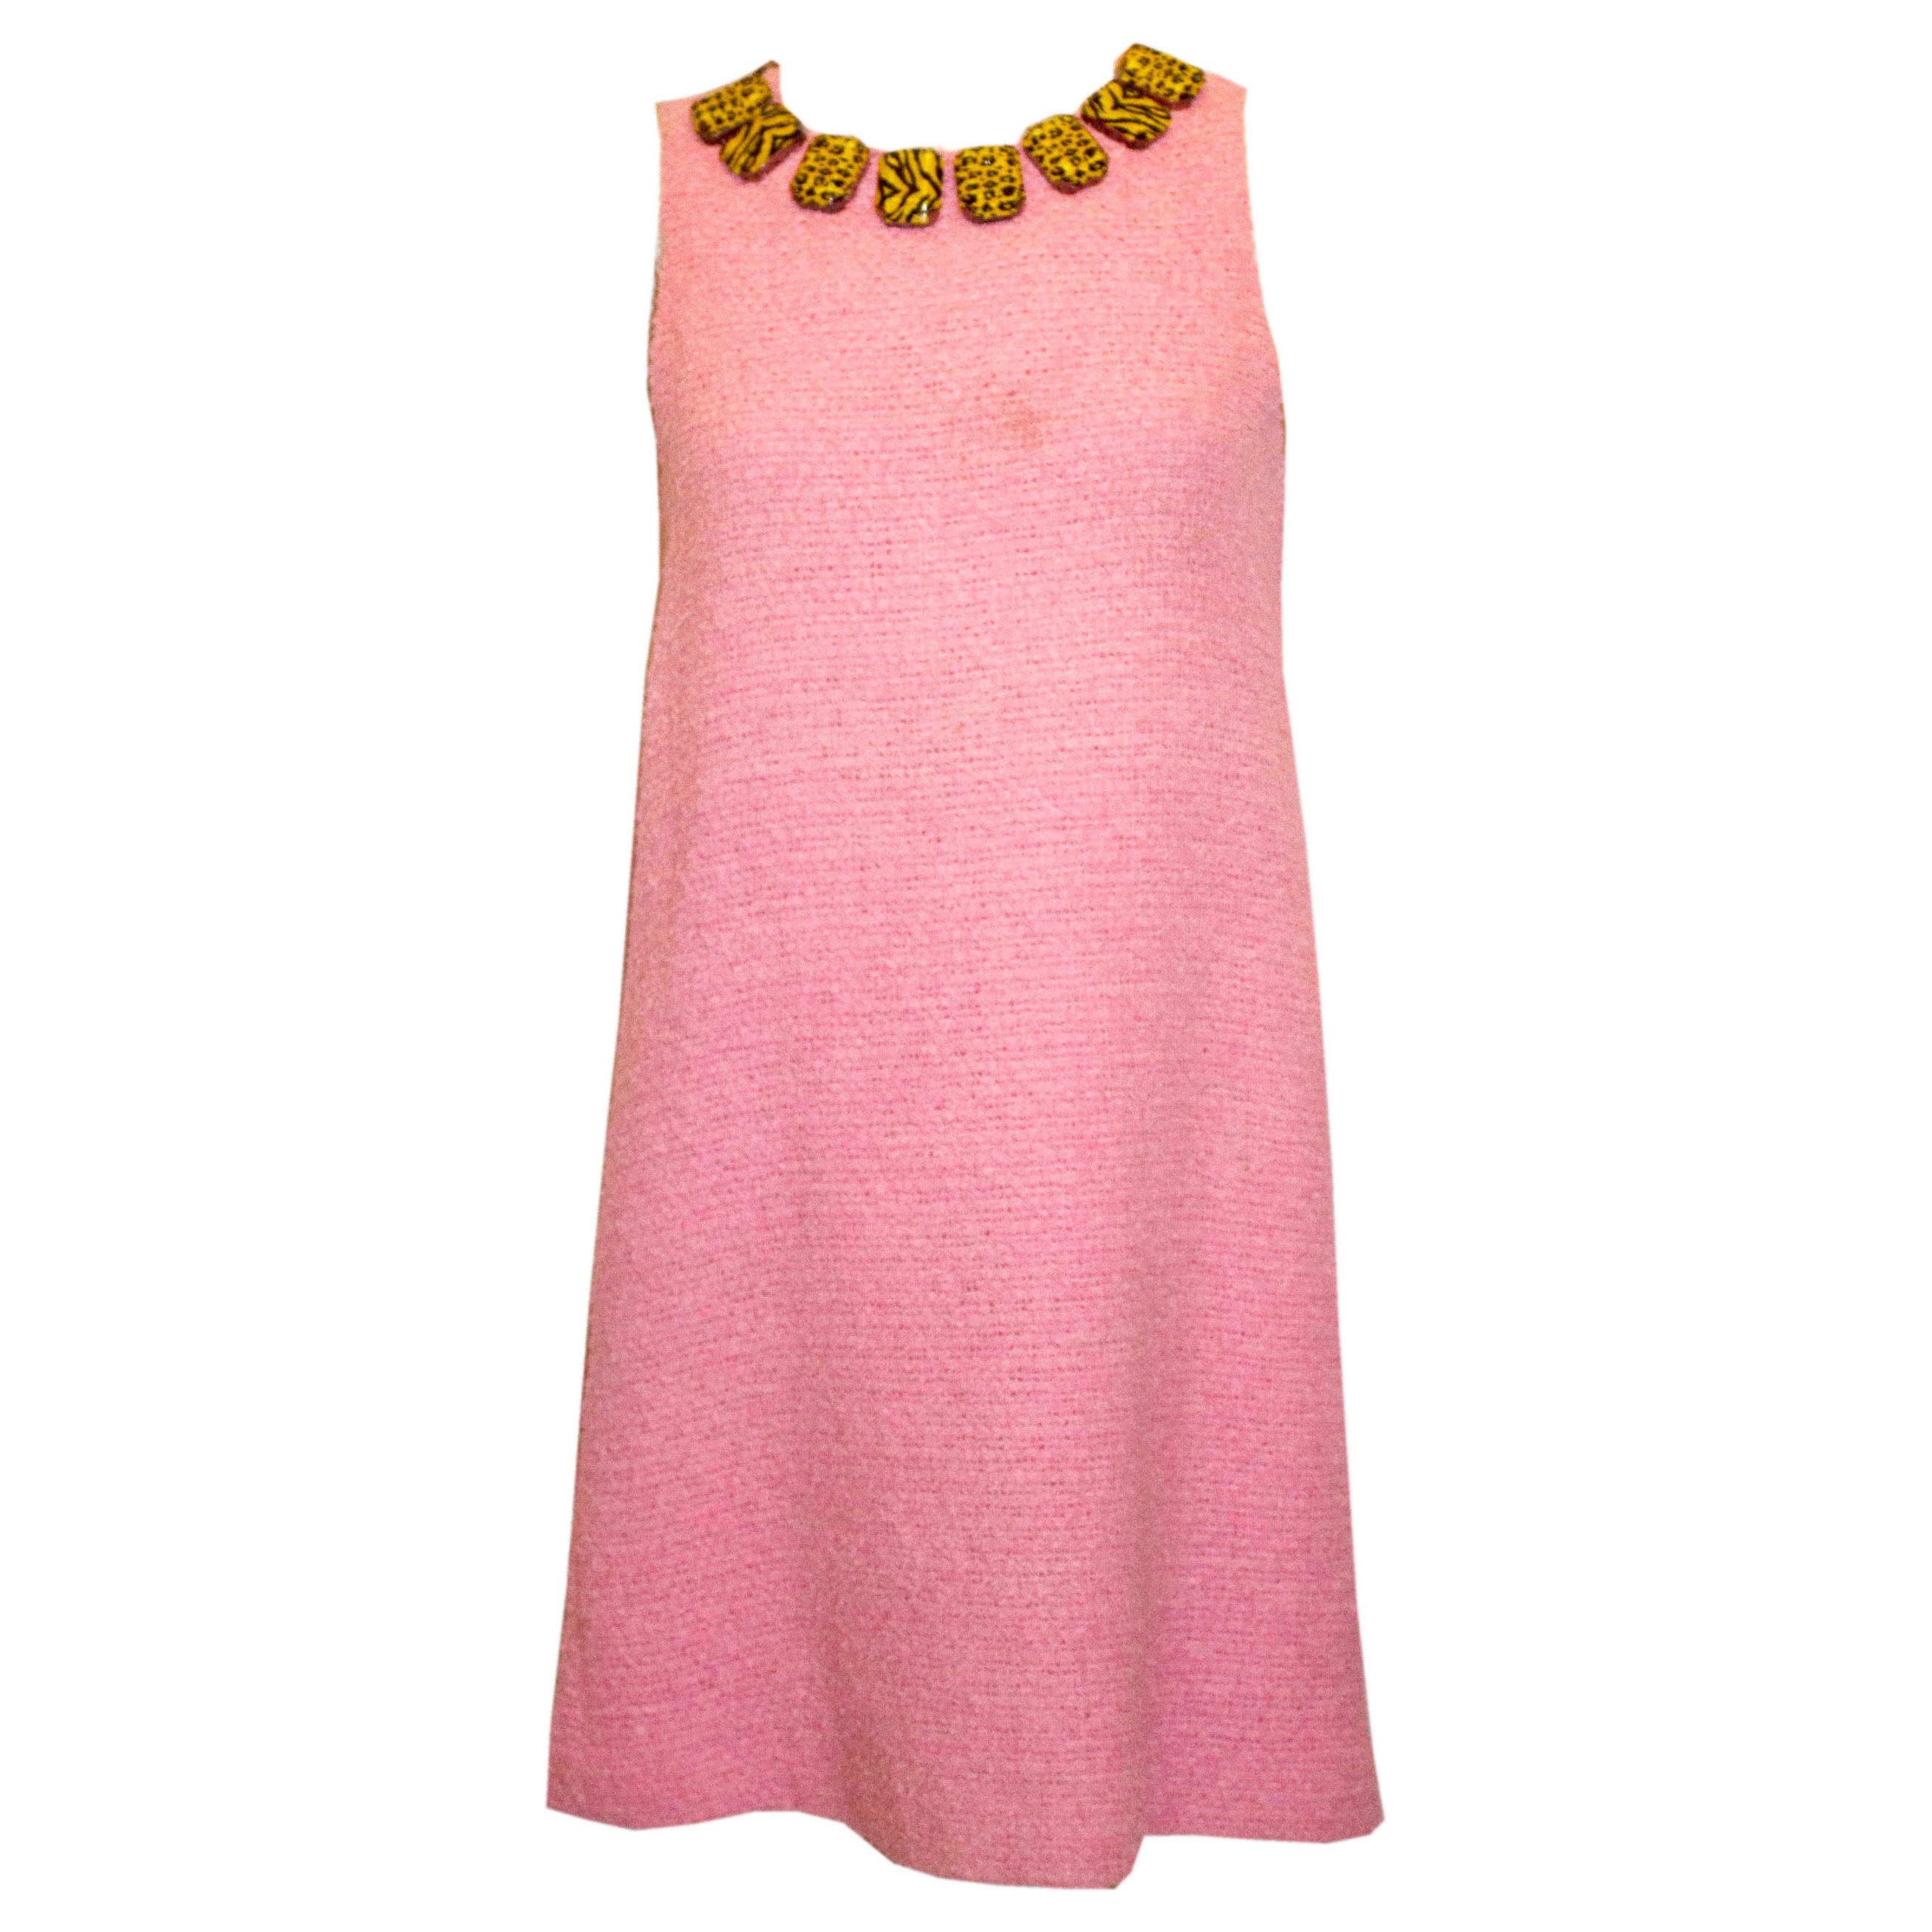 Moschino Pink Dress with Animal Button Detail